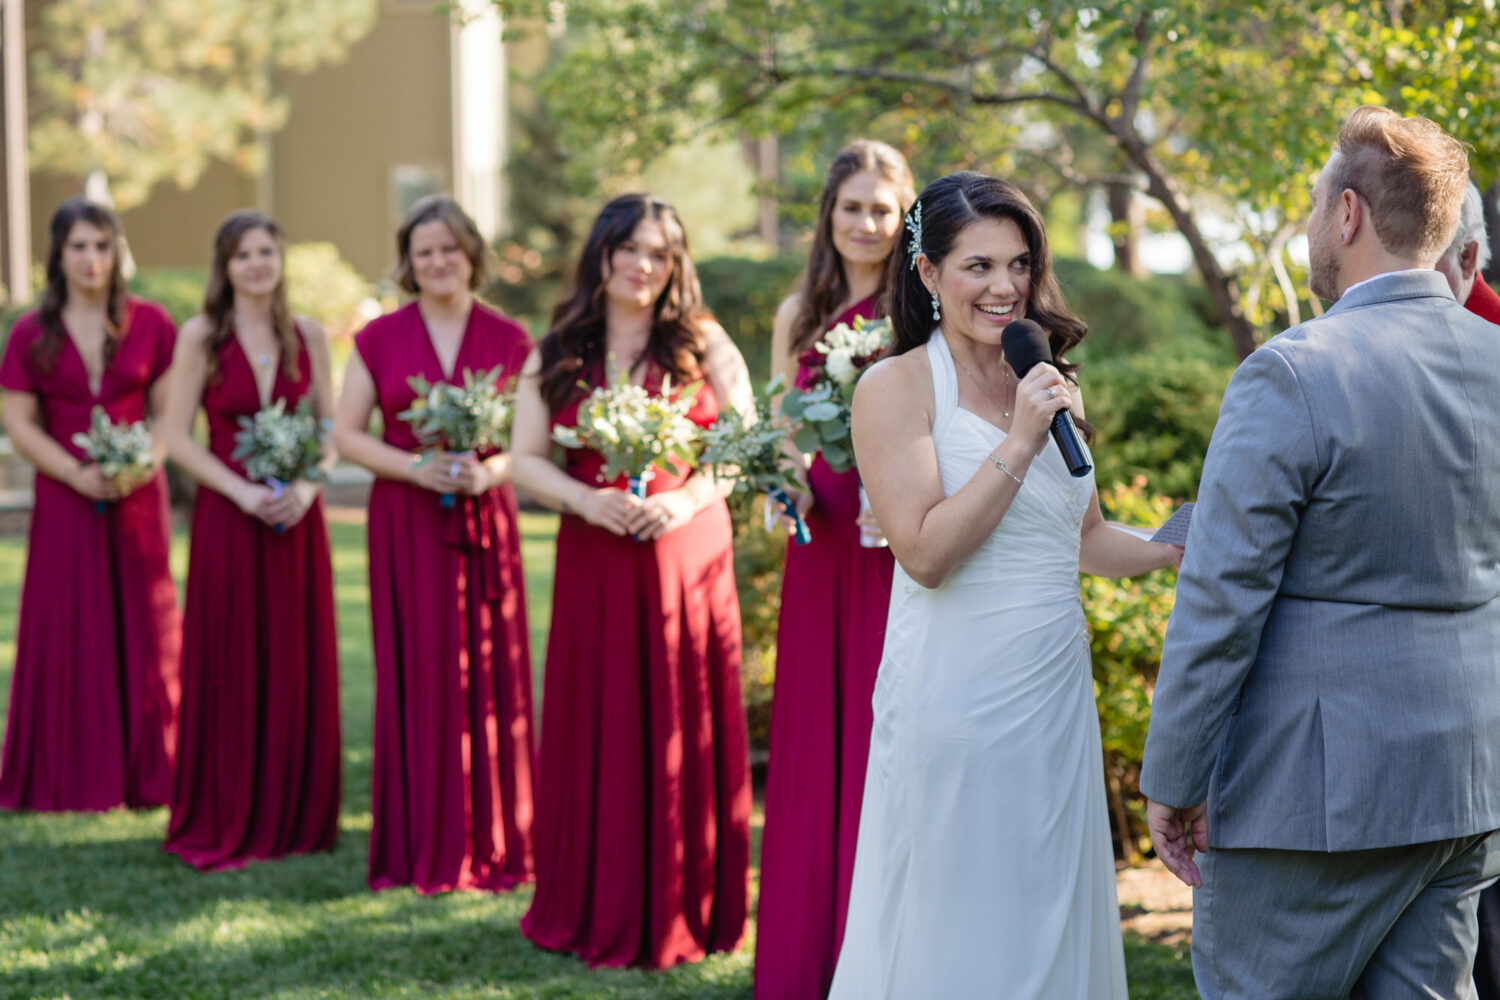 A wedding ceremony microphone helps guests hear the exchange of vows, even at smaller weddings.